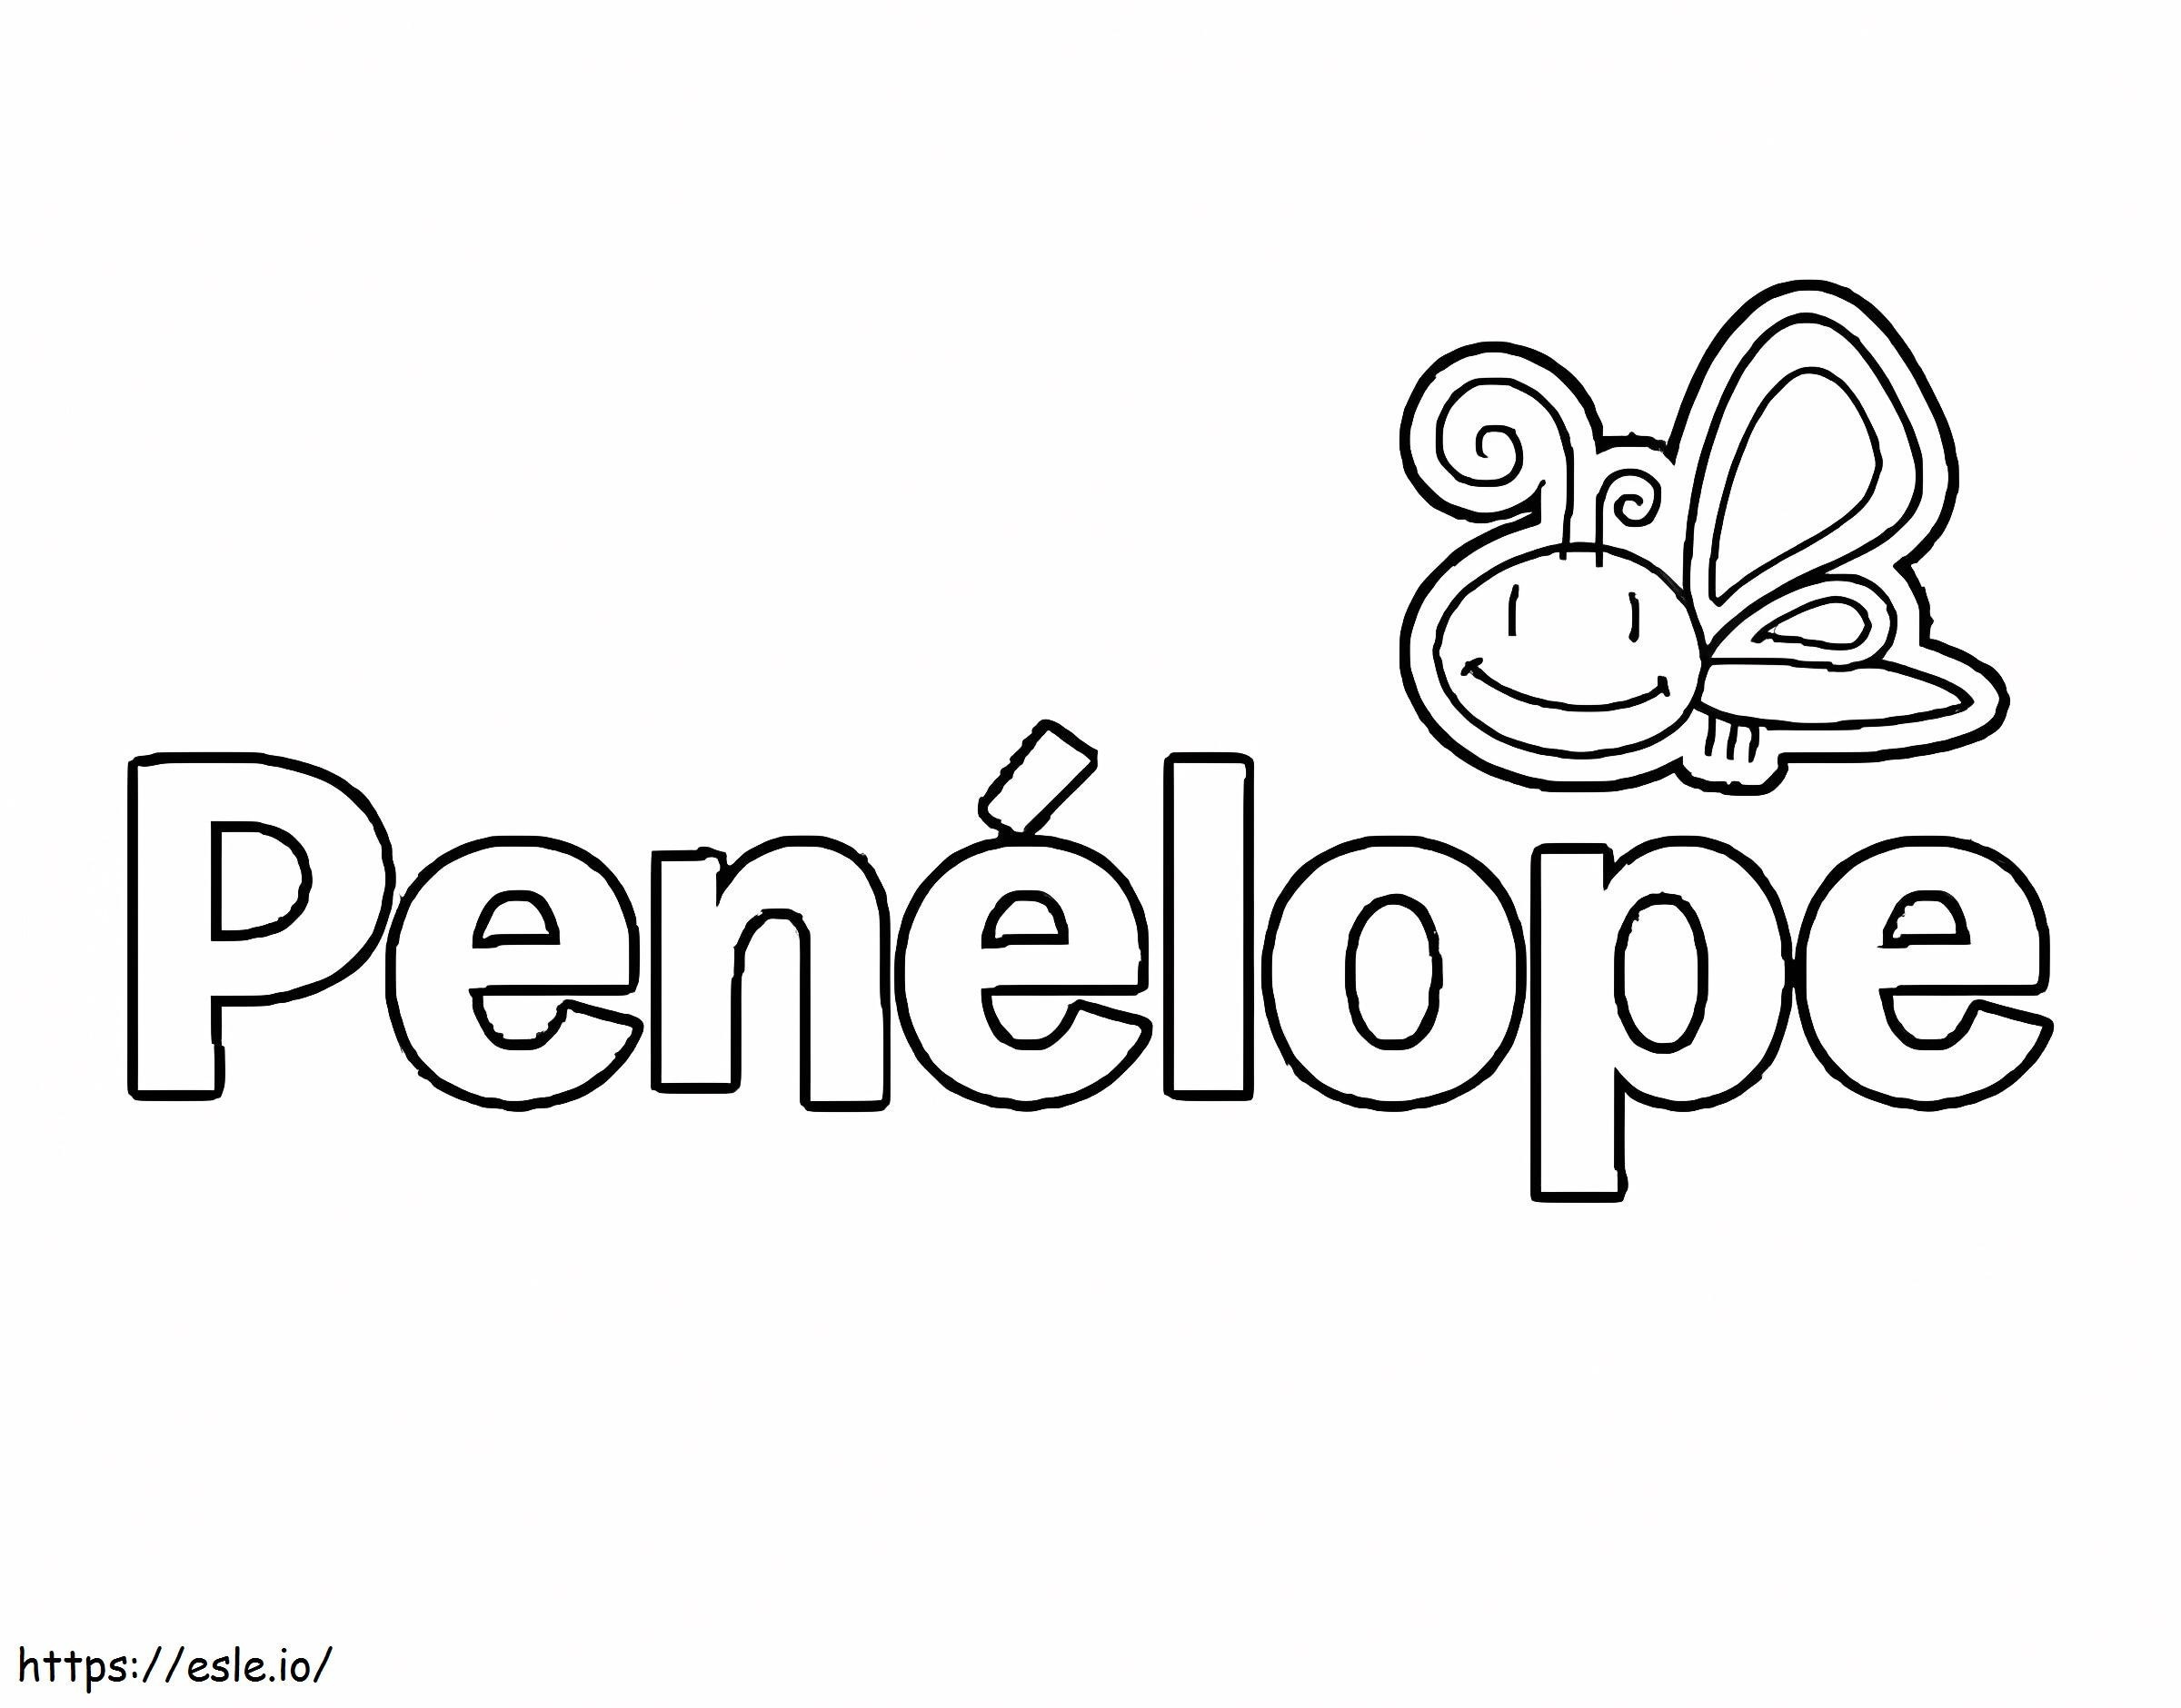 Penelope Free Printable coloring page